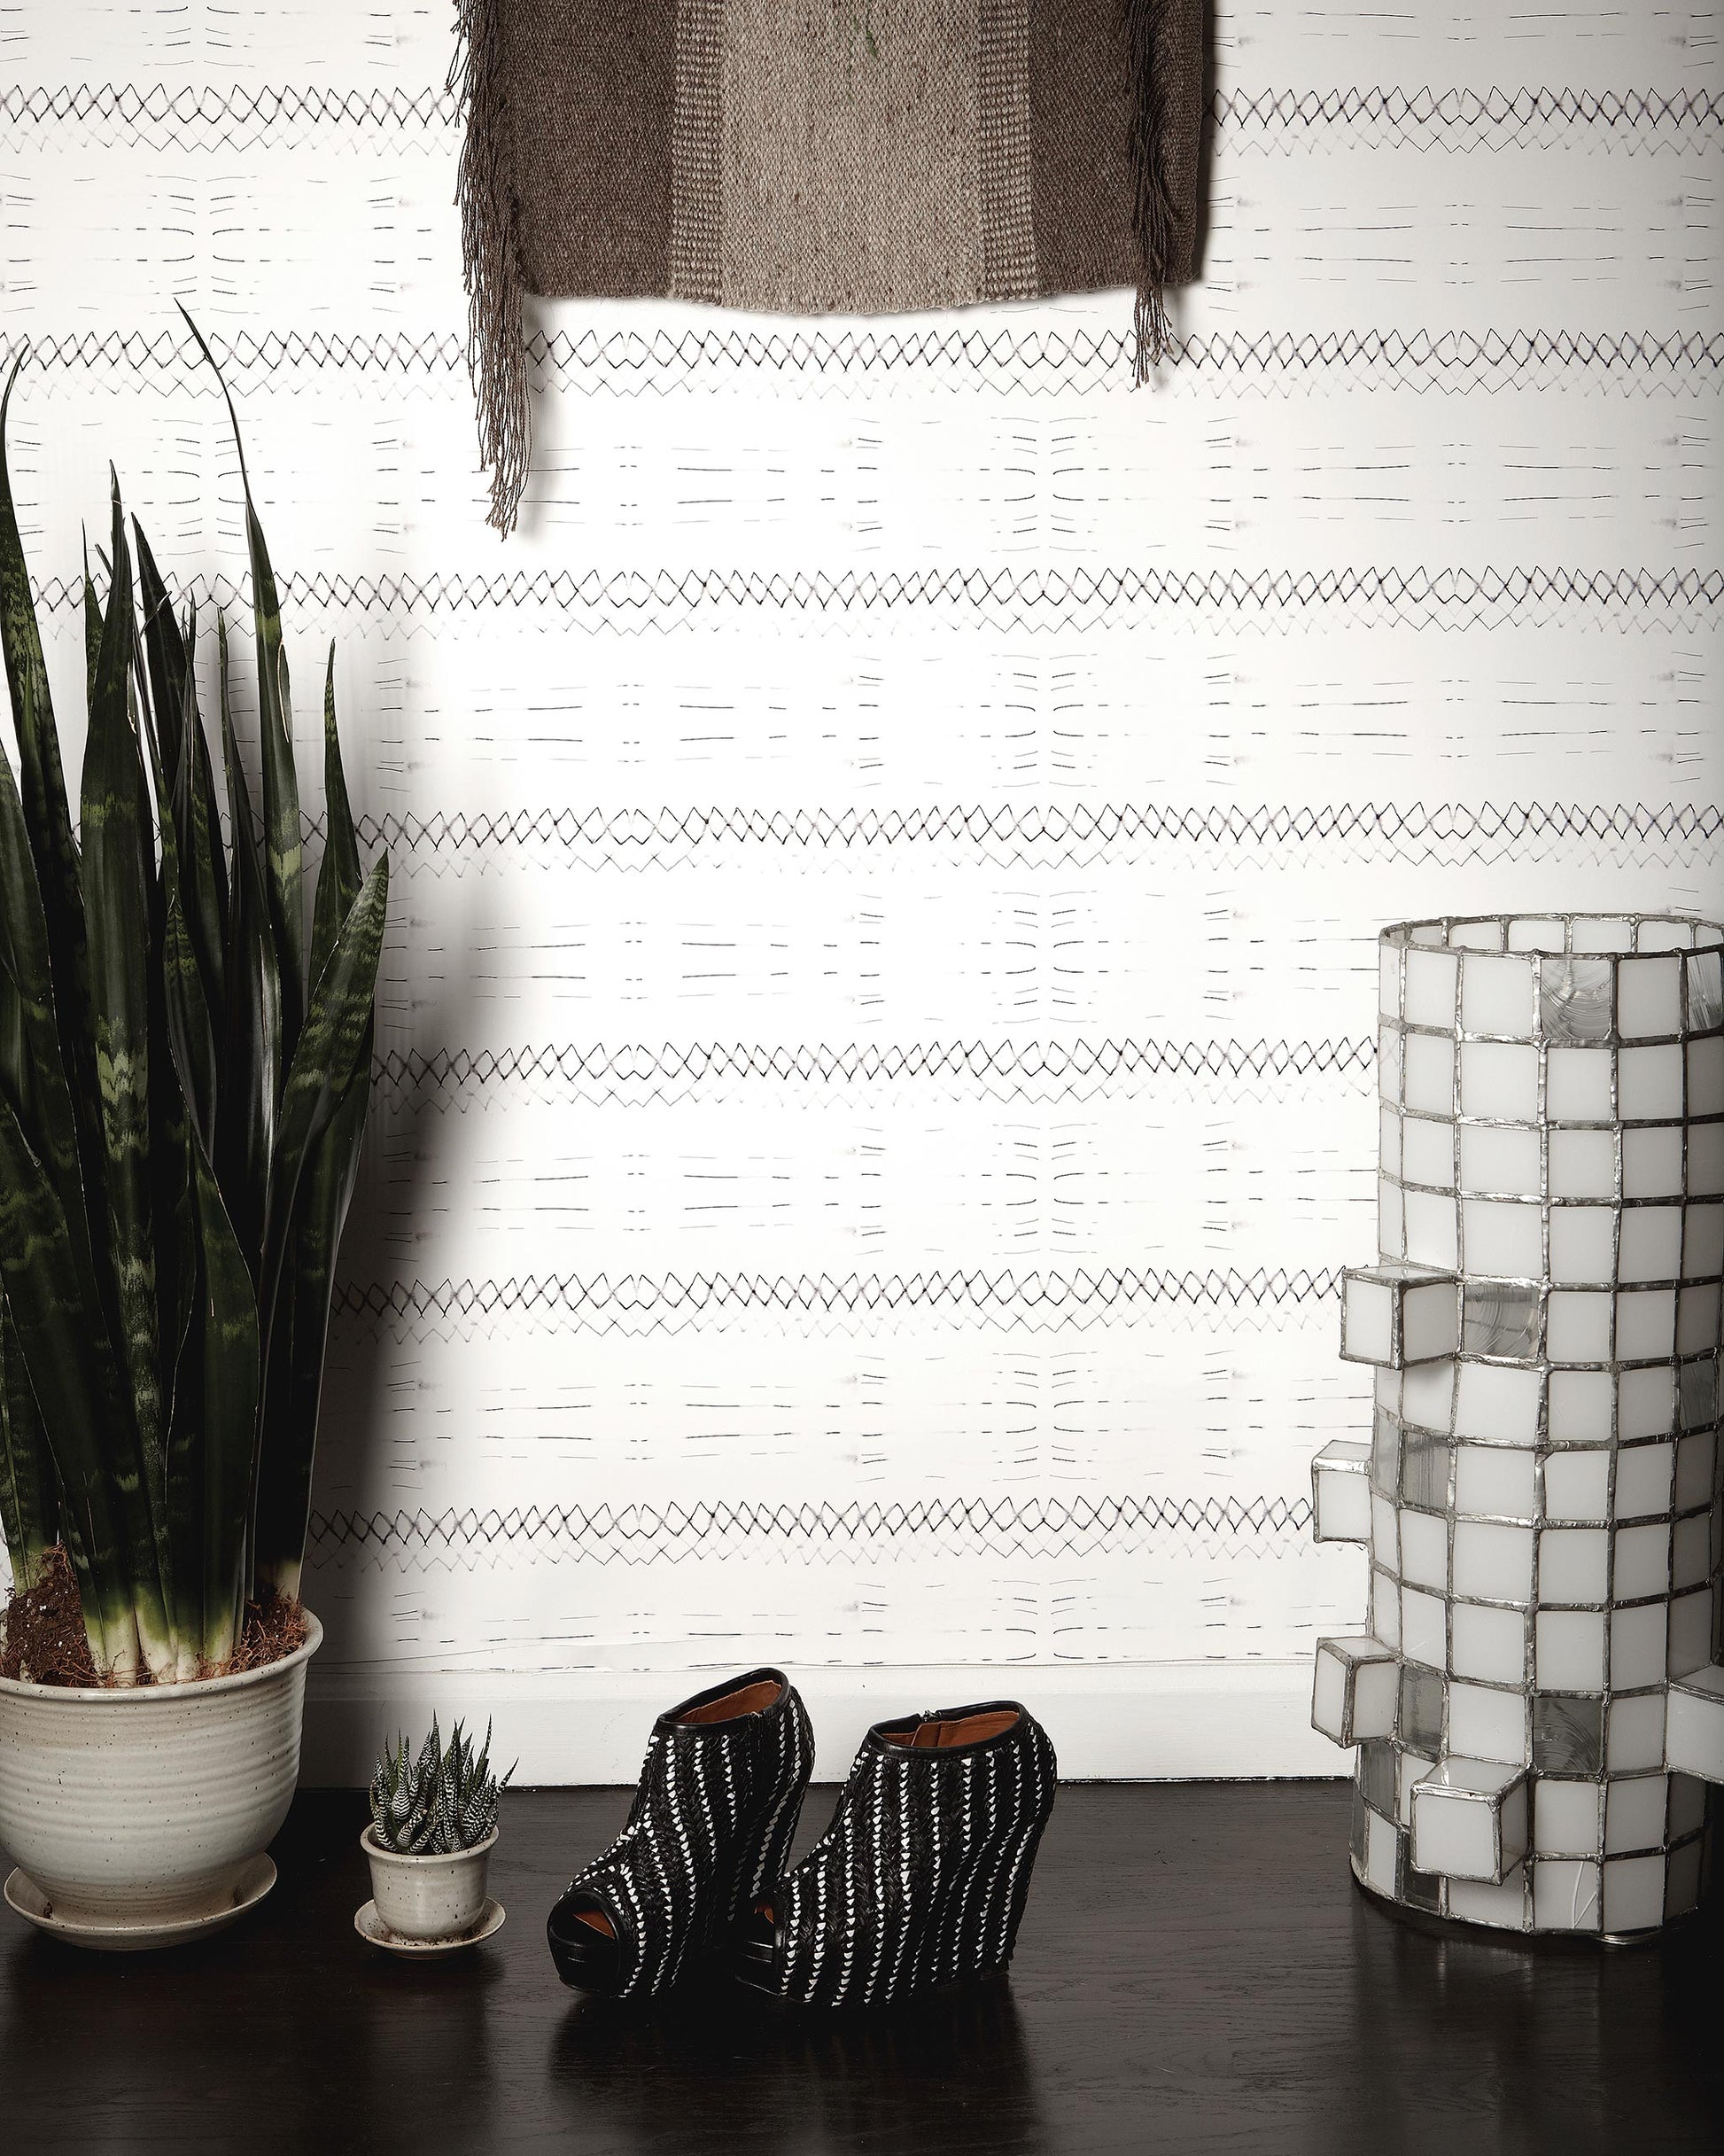 A custom fabric with a graphic pattern, featuring a Native Stripe Wallpaper||Black + White and a pair of shoes.